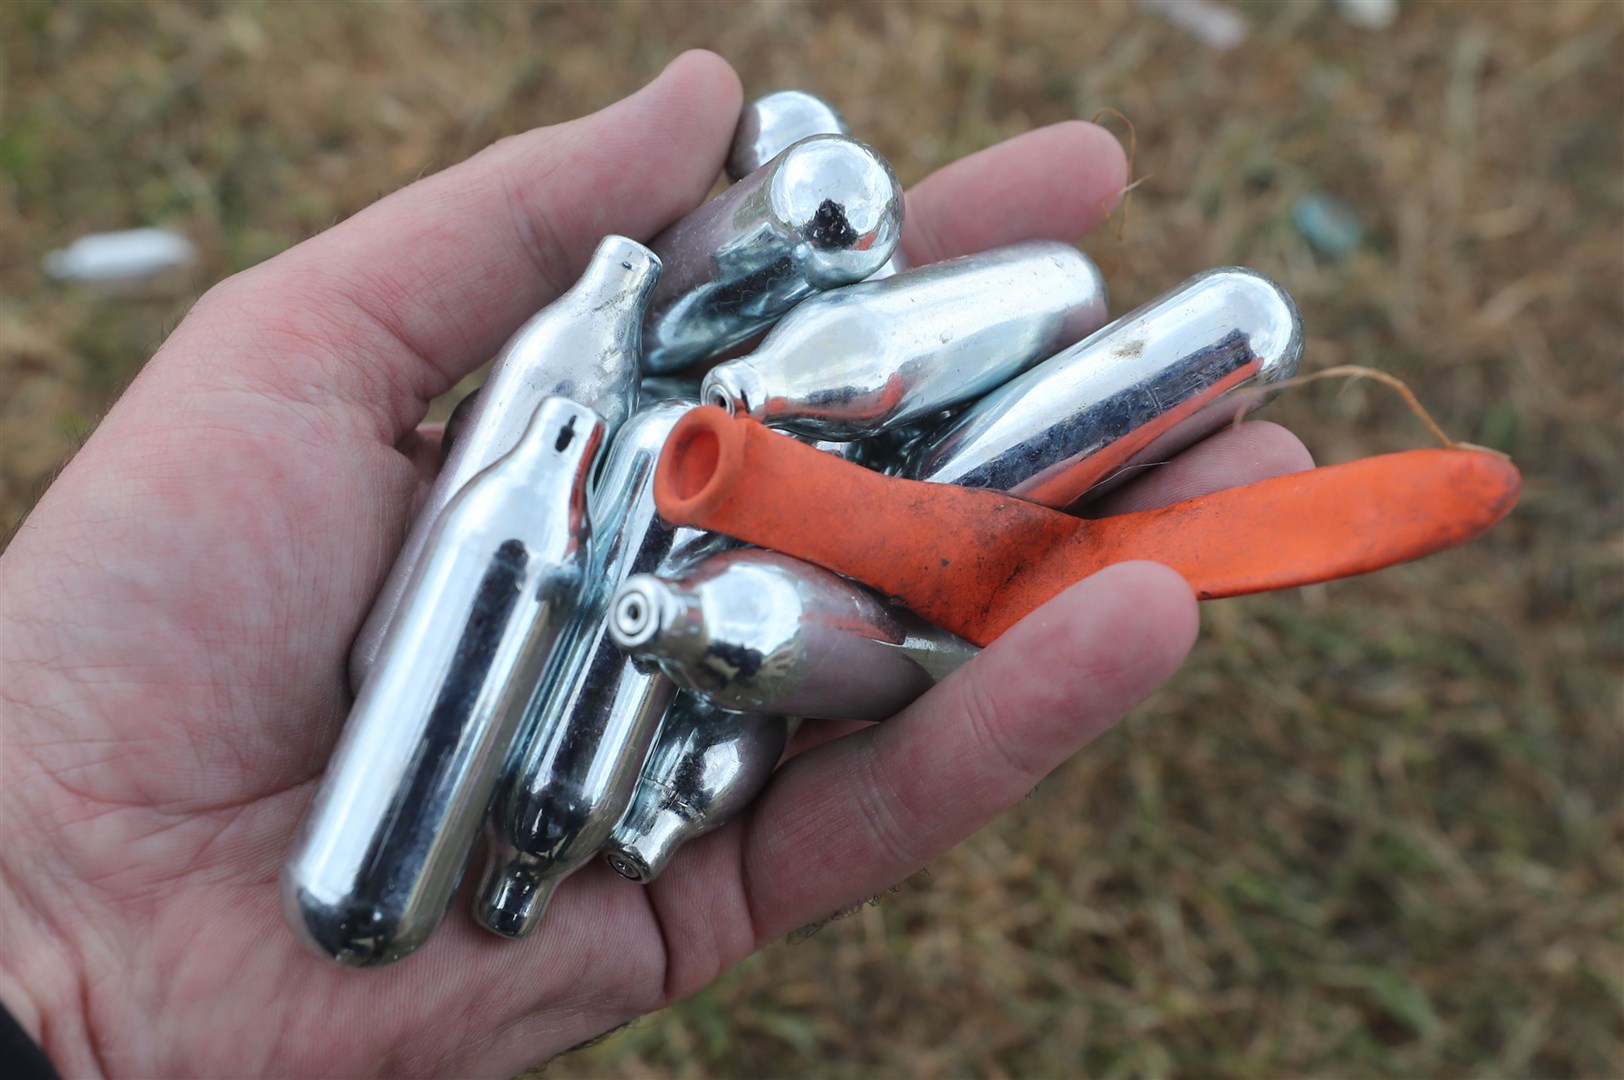 Discarded laughing gas canisters in Dublin (PA)